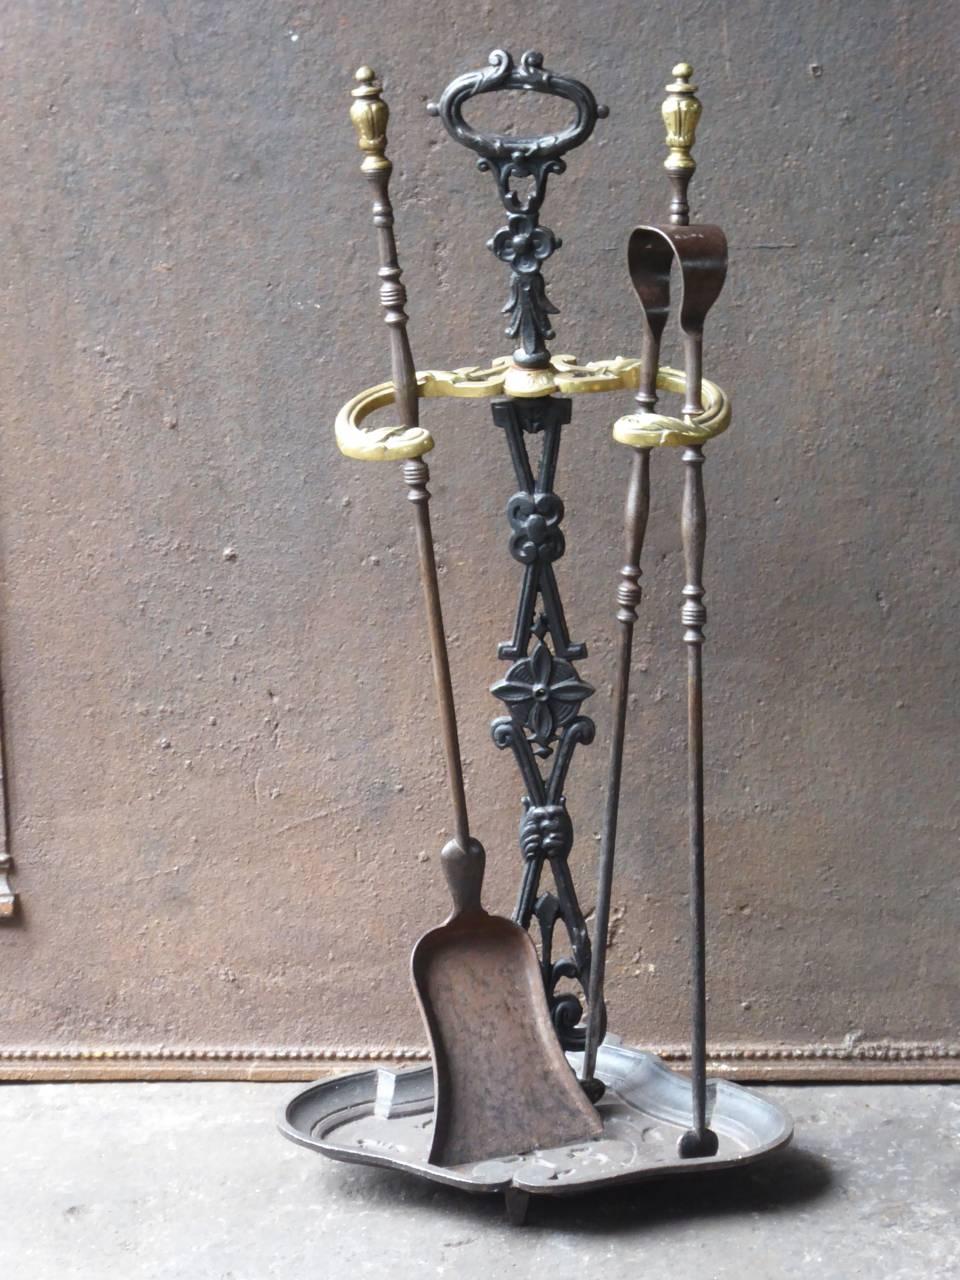 19th century French fireplace tool set fire irons made of cast iron, wrought iron and brass.

We have a unique and specialized collection of antique and used fireplace accessories consisting of more than 1000 listings at 1stdibs. Amongst others, we